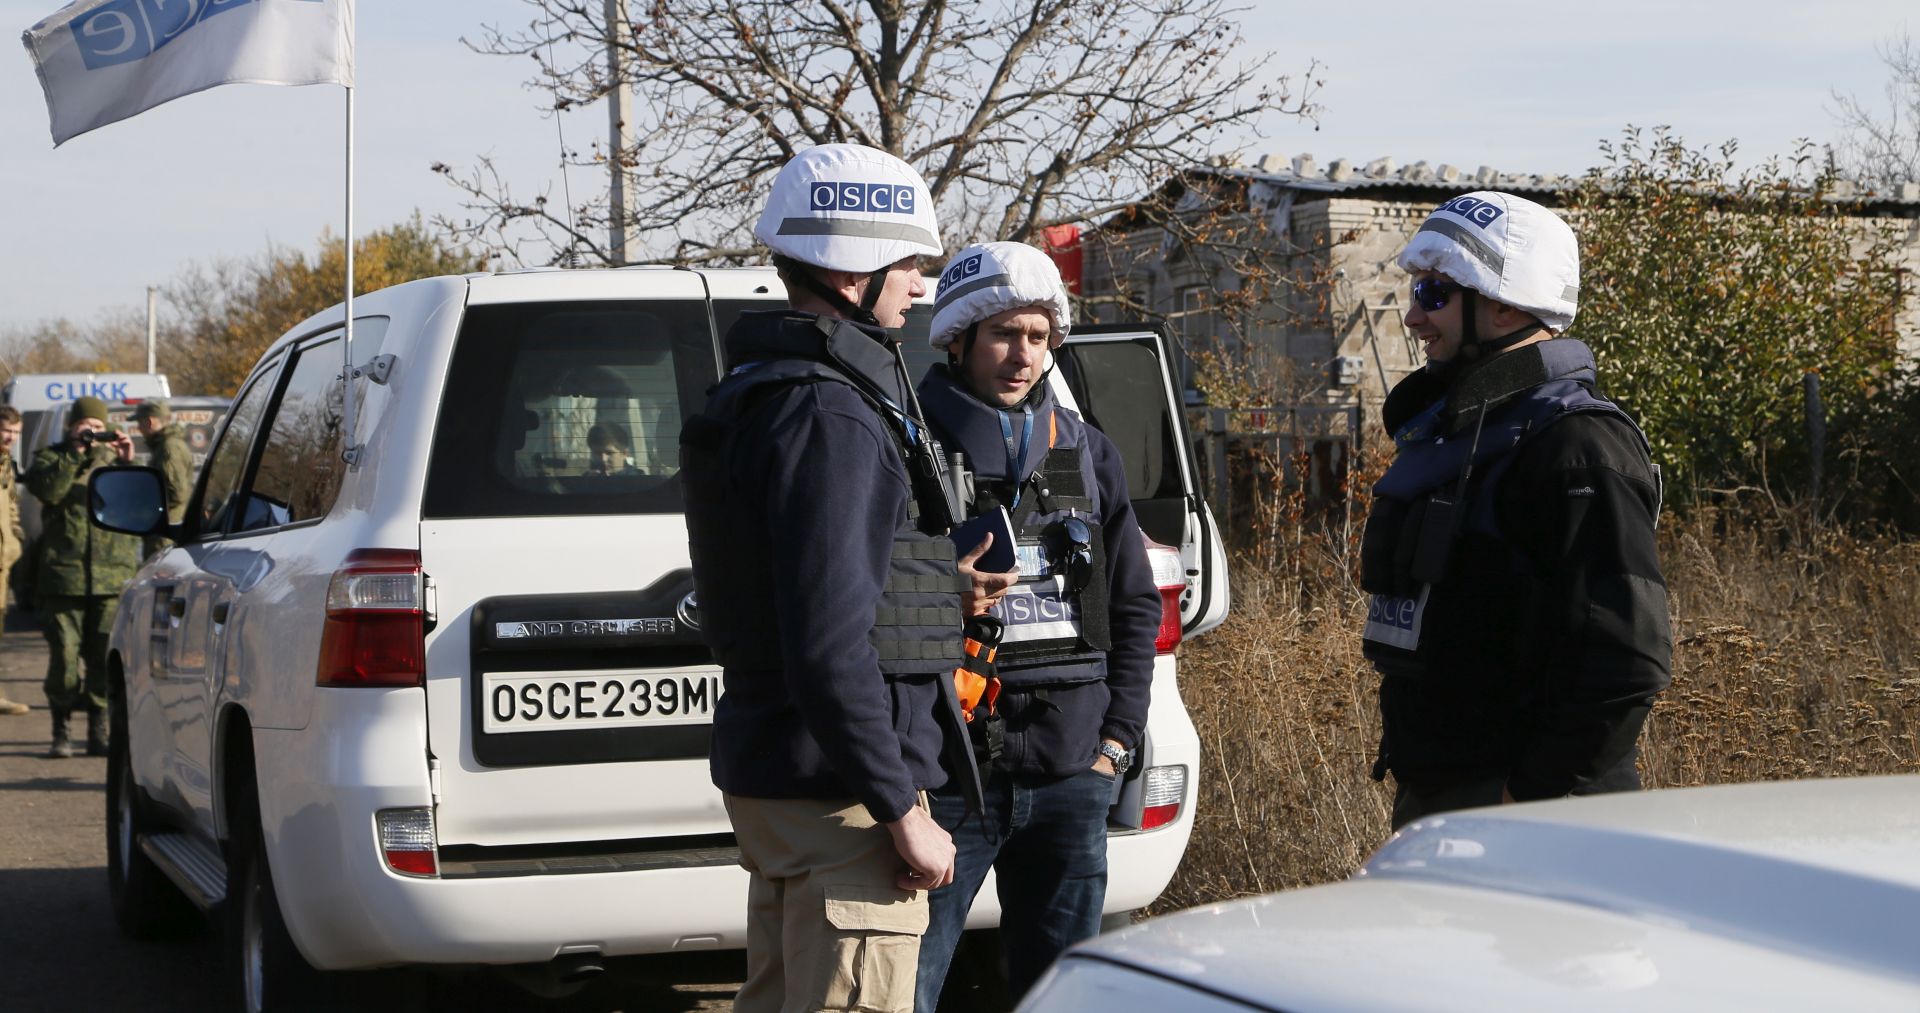 epa07908419 OSCE observers inspect the situation on the pro-Russian militants' side close to the front line near the Petrivske village, Donetsk area, Ukraine, 09 October 2019. Ukrainian Foreign Minister Vadym Prystaiko has said the disengagement of troops, which was planned on 07 October 2019 in the village of Petrivske and the town of Zolote, has been postponed due to shelling by Russian-led forces.  EPA/DAVE MUSTAINE